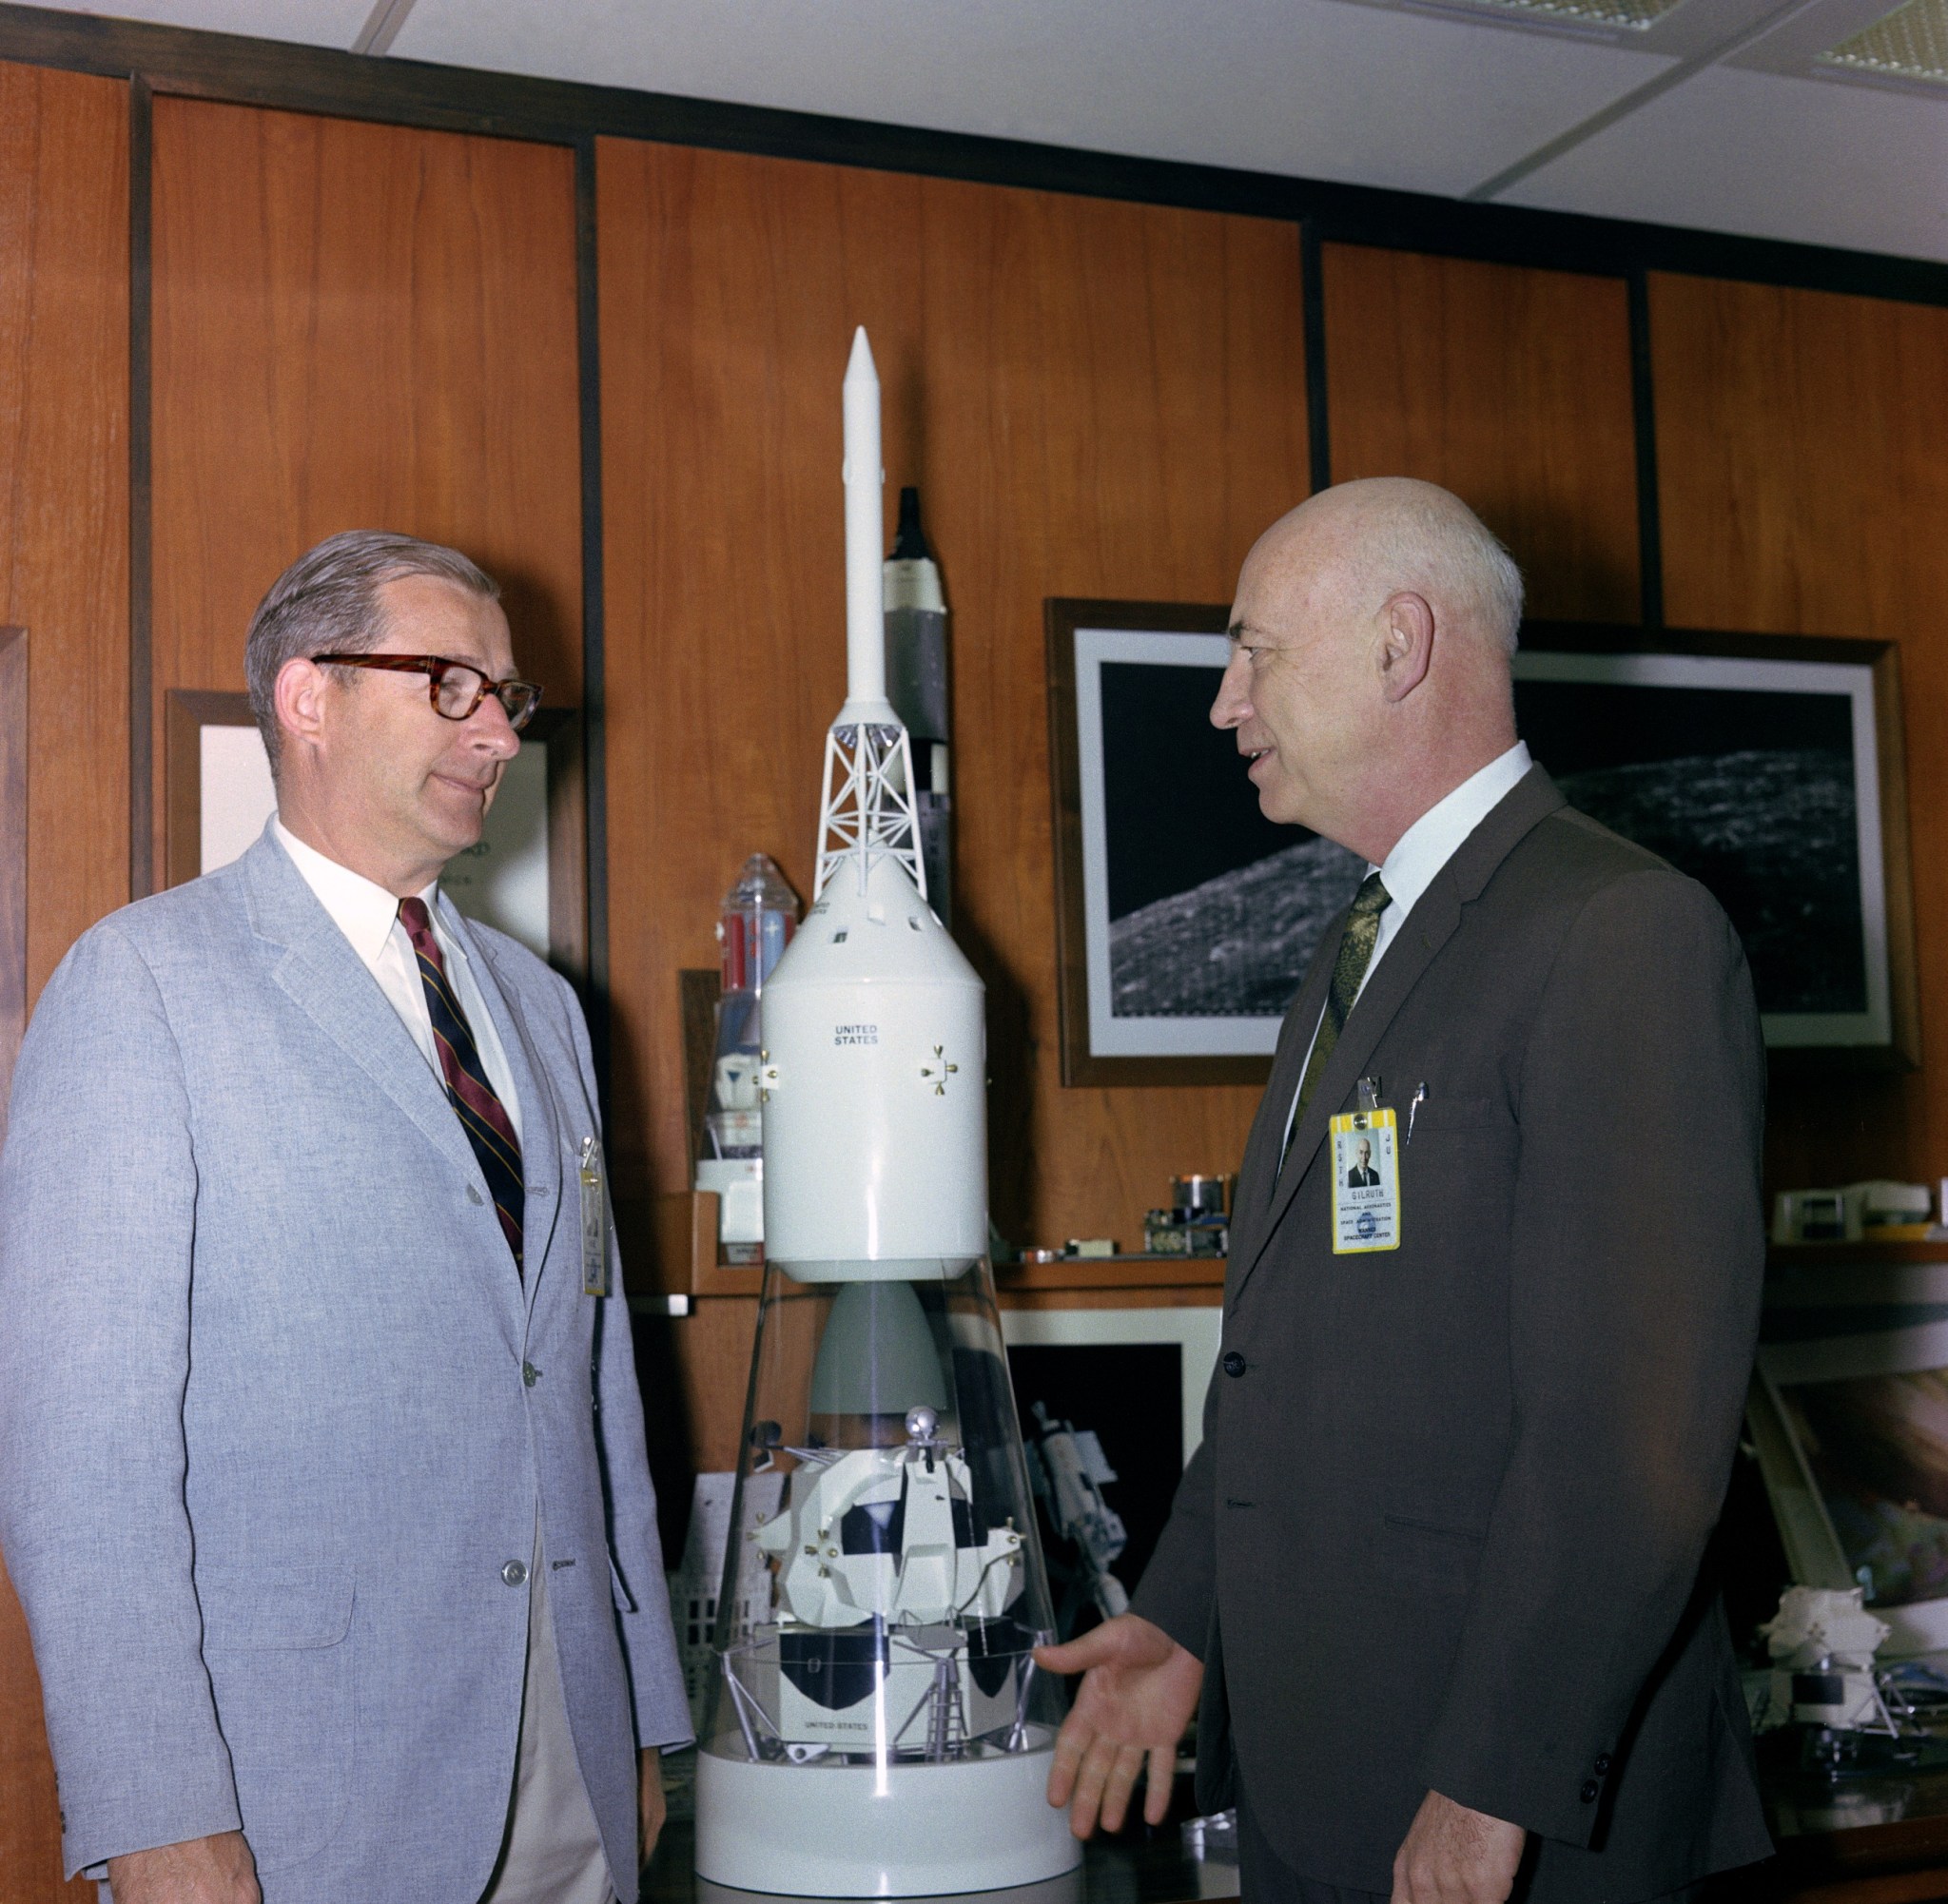 Paine meeting with Manned Spacecraft Center Director Robert Gilruth in April 1968.